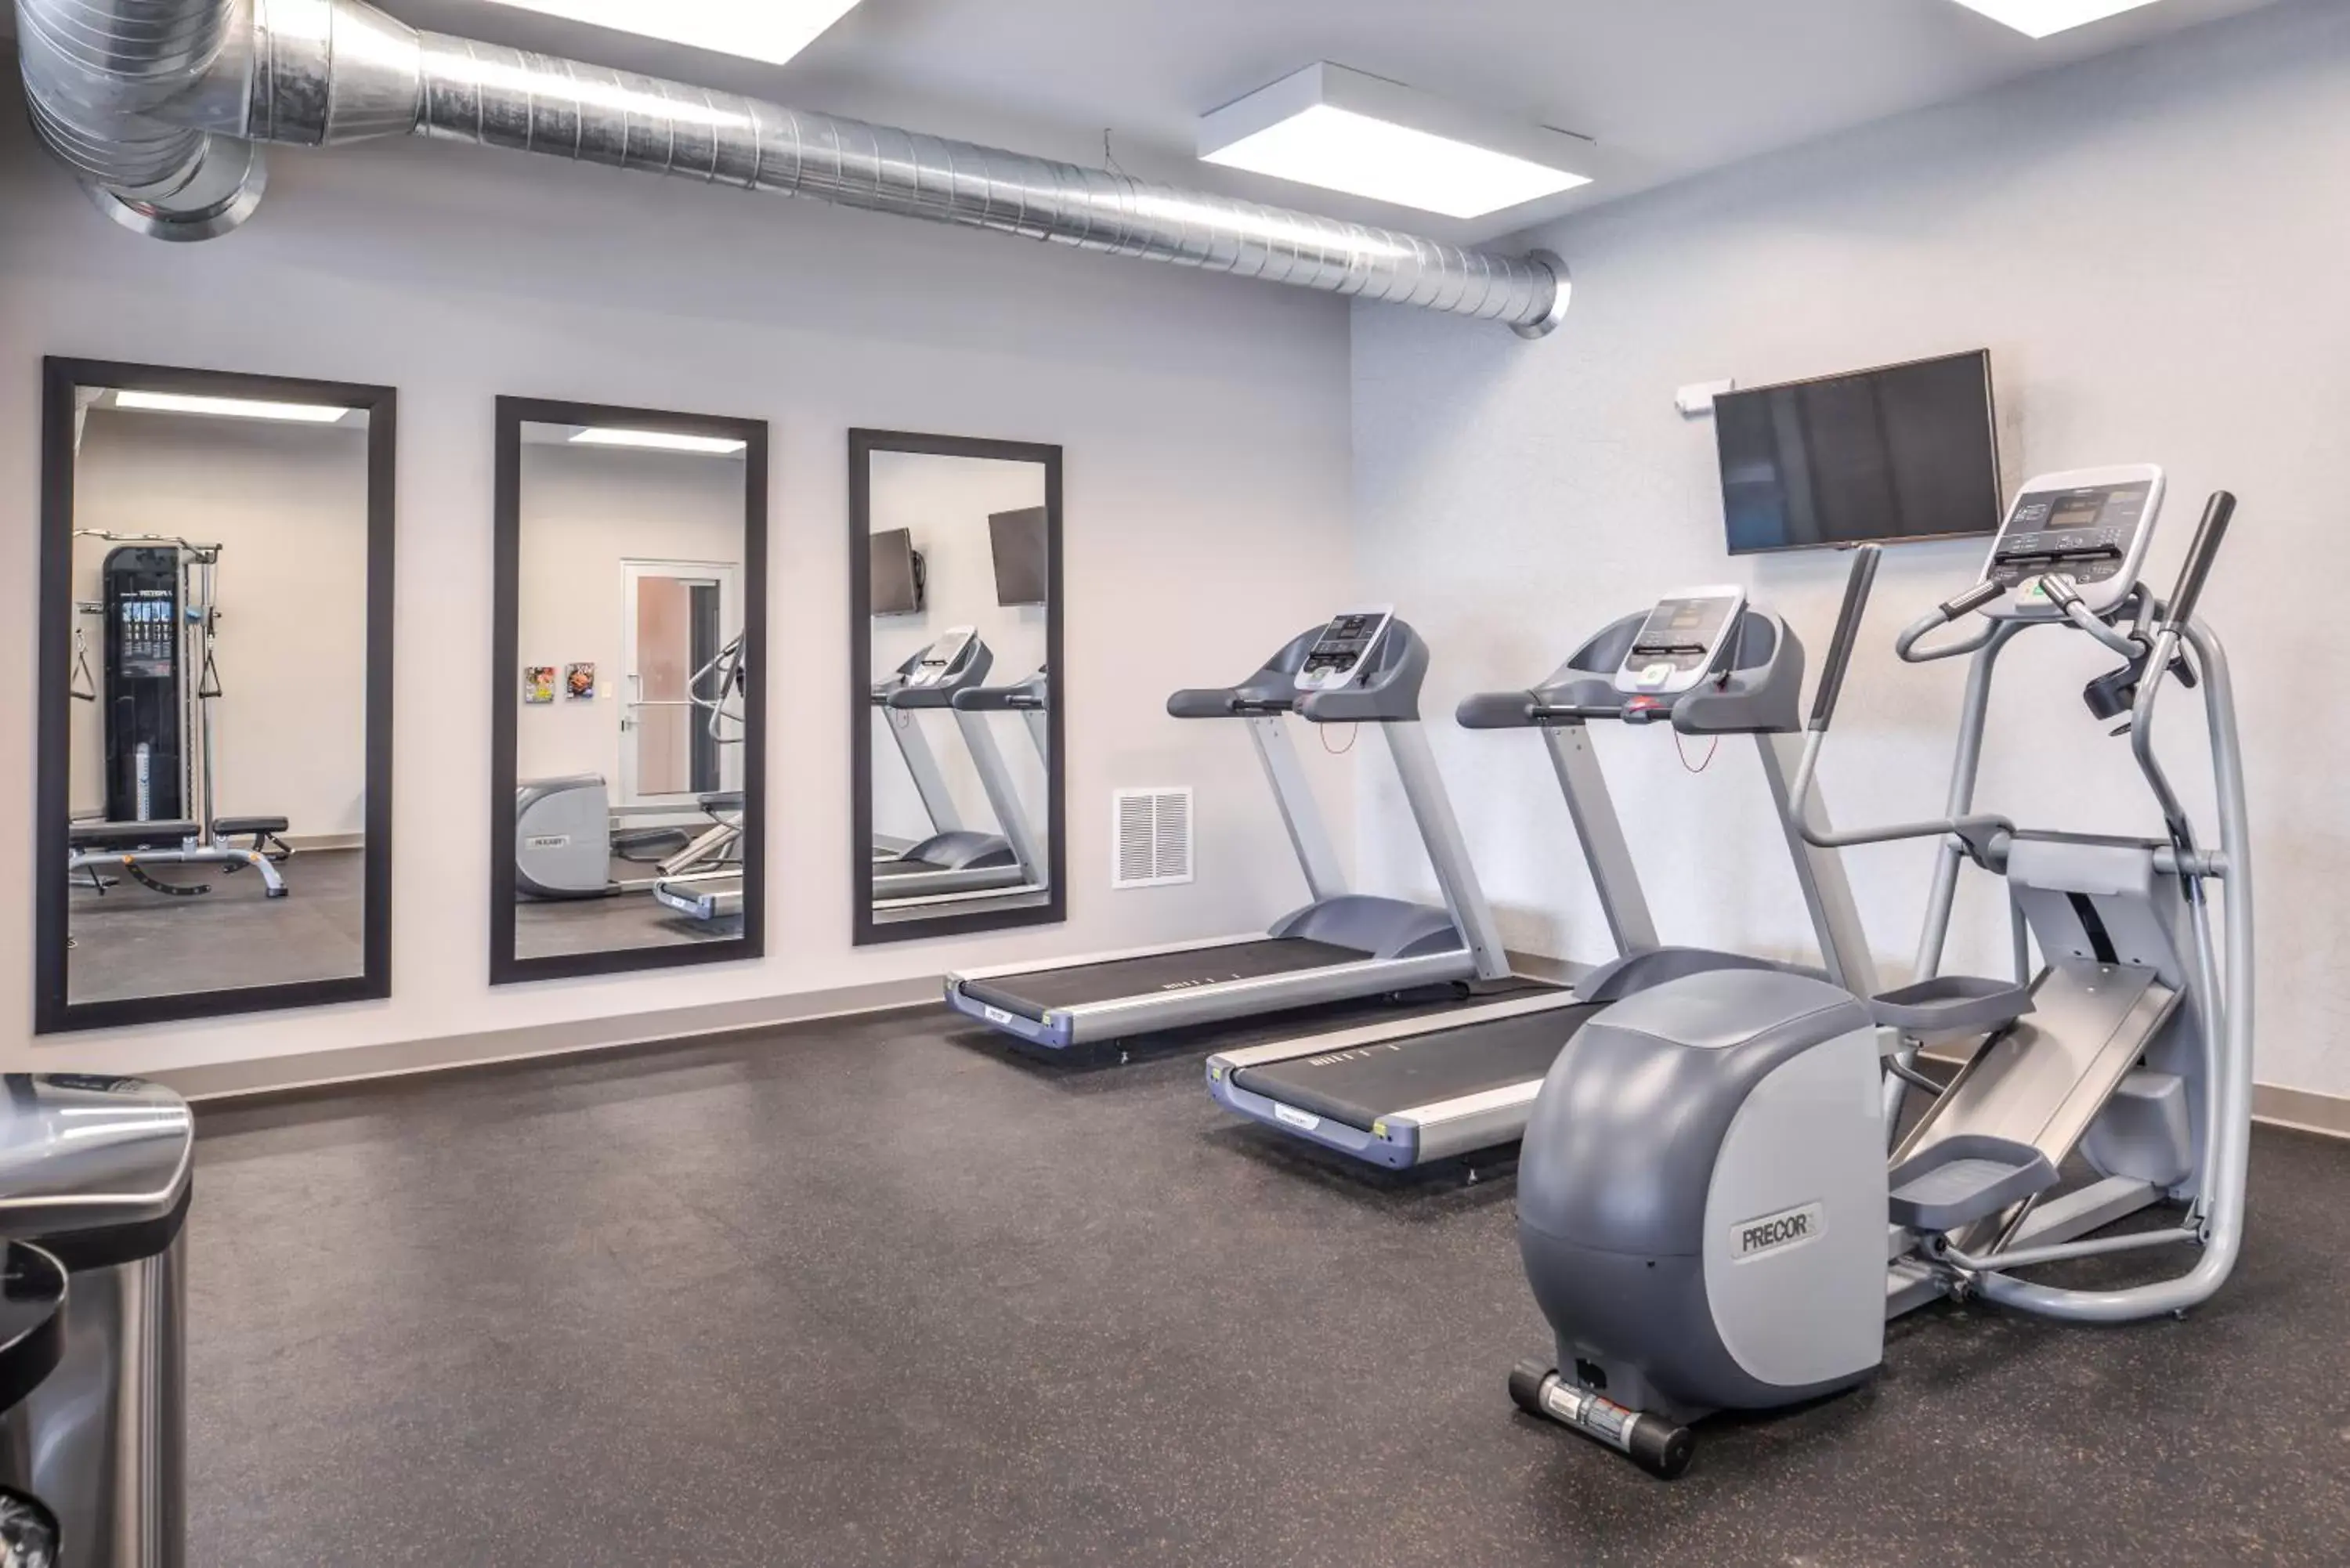 Fitness centre/facilities, Fitness Center/Facilities in Country Inn & Suites by Radisson, Ft. Atkinson, WI